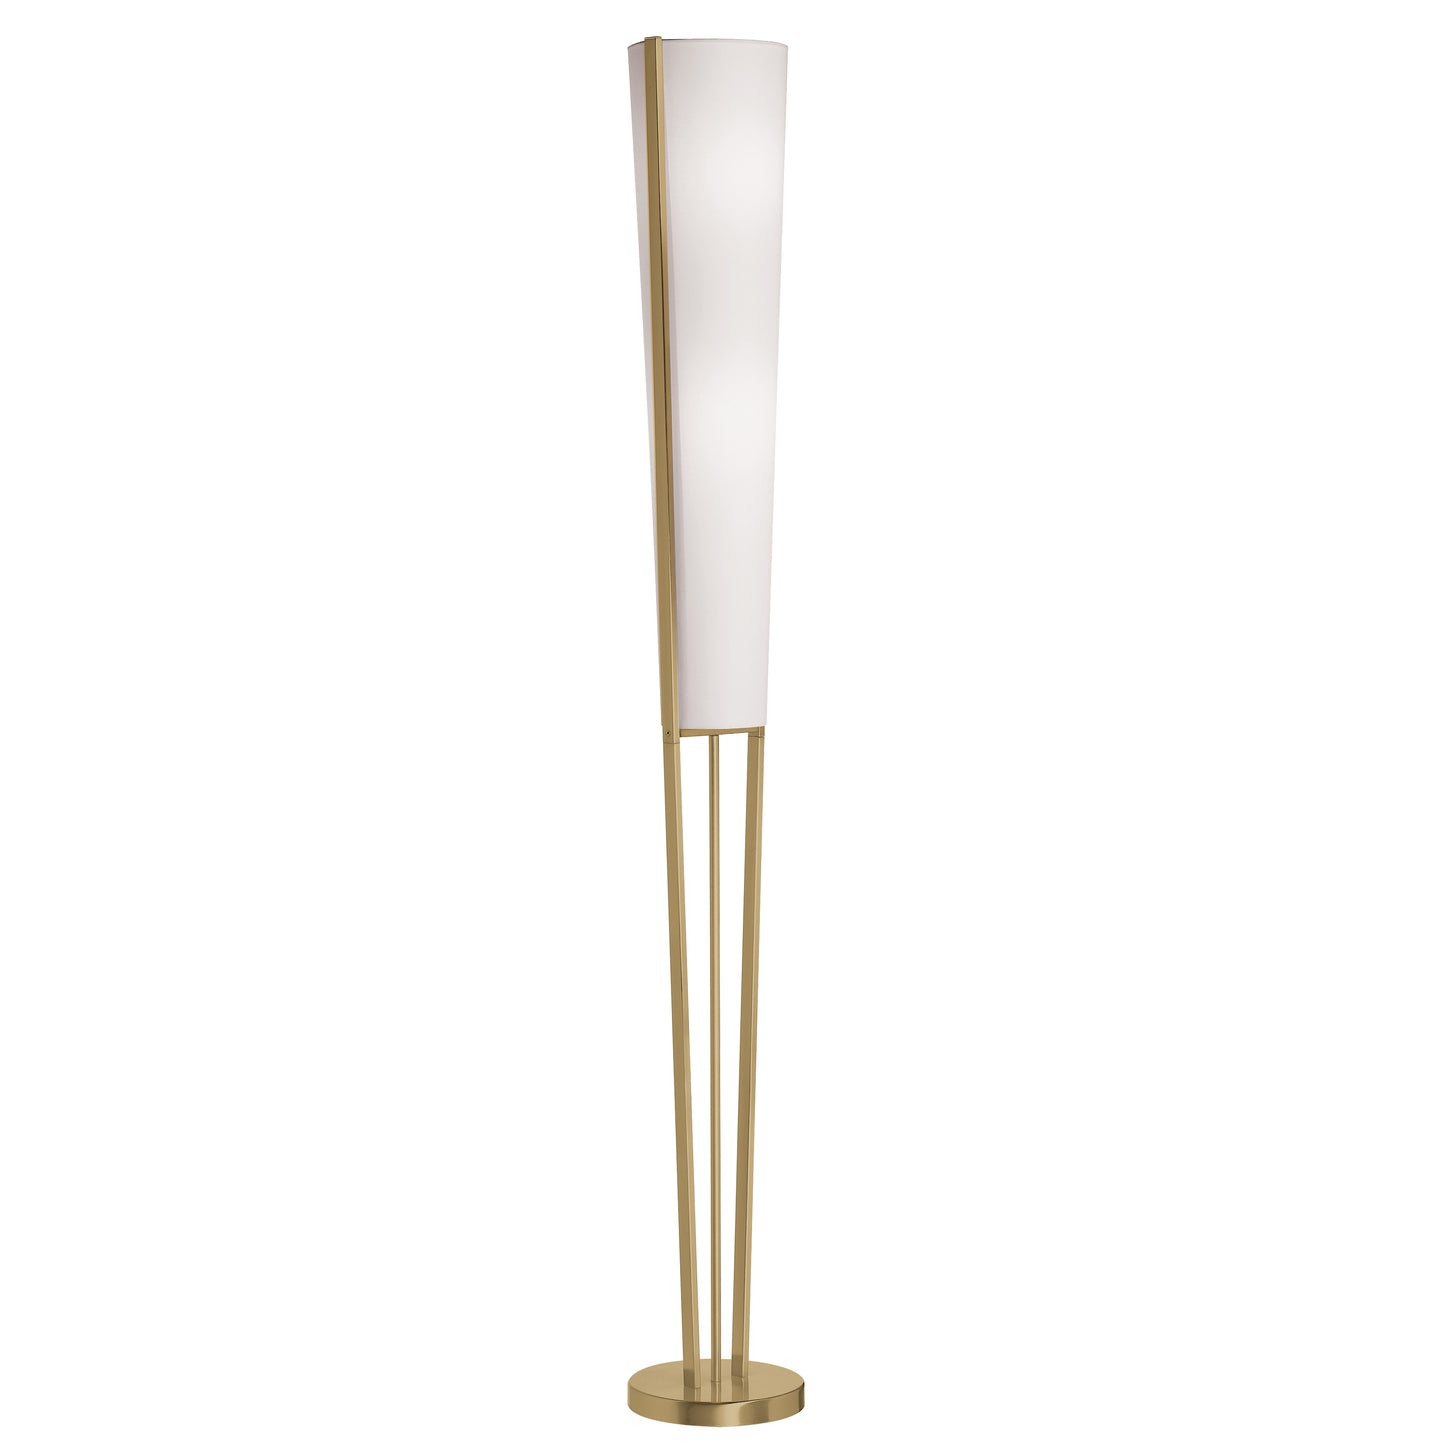 Dainolite 83323F-AGB 2 Light Incandescent Floor Lamp, Aged Brass with White Shade